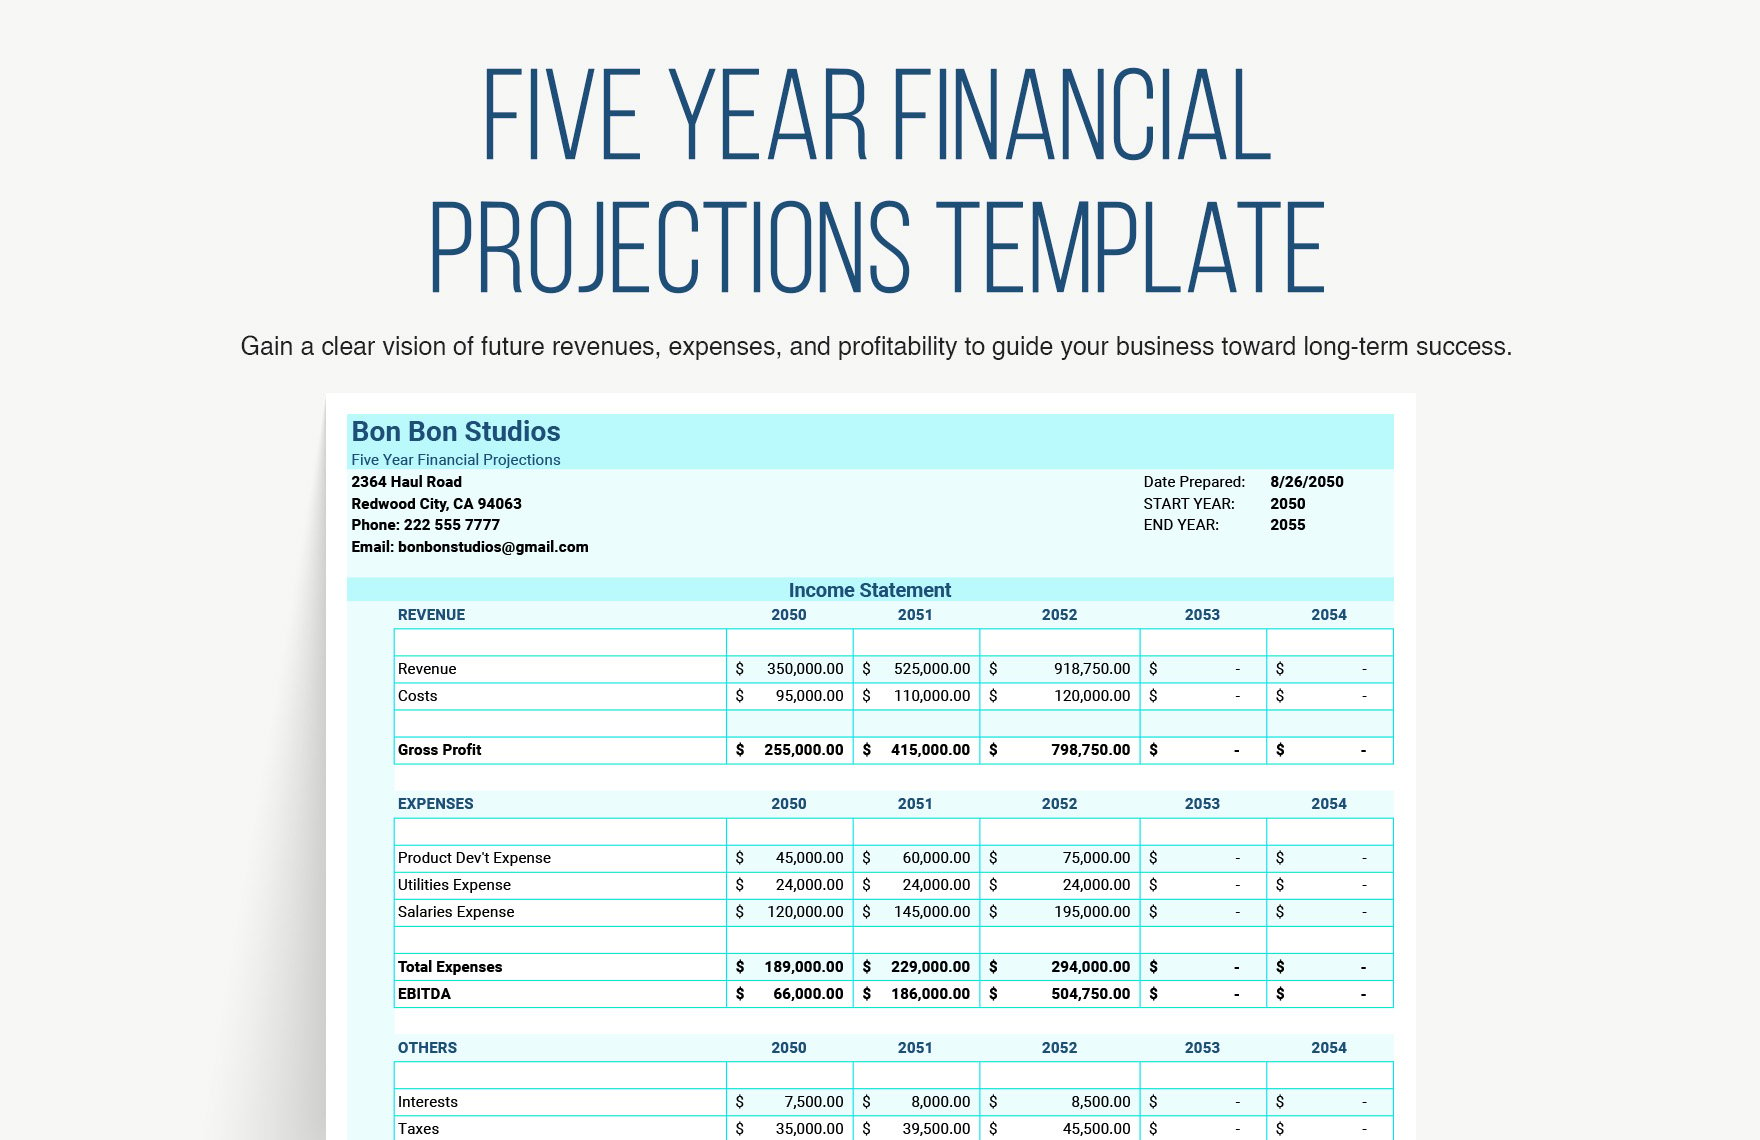 Five Year Financial Projections Template